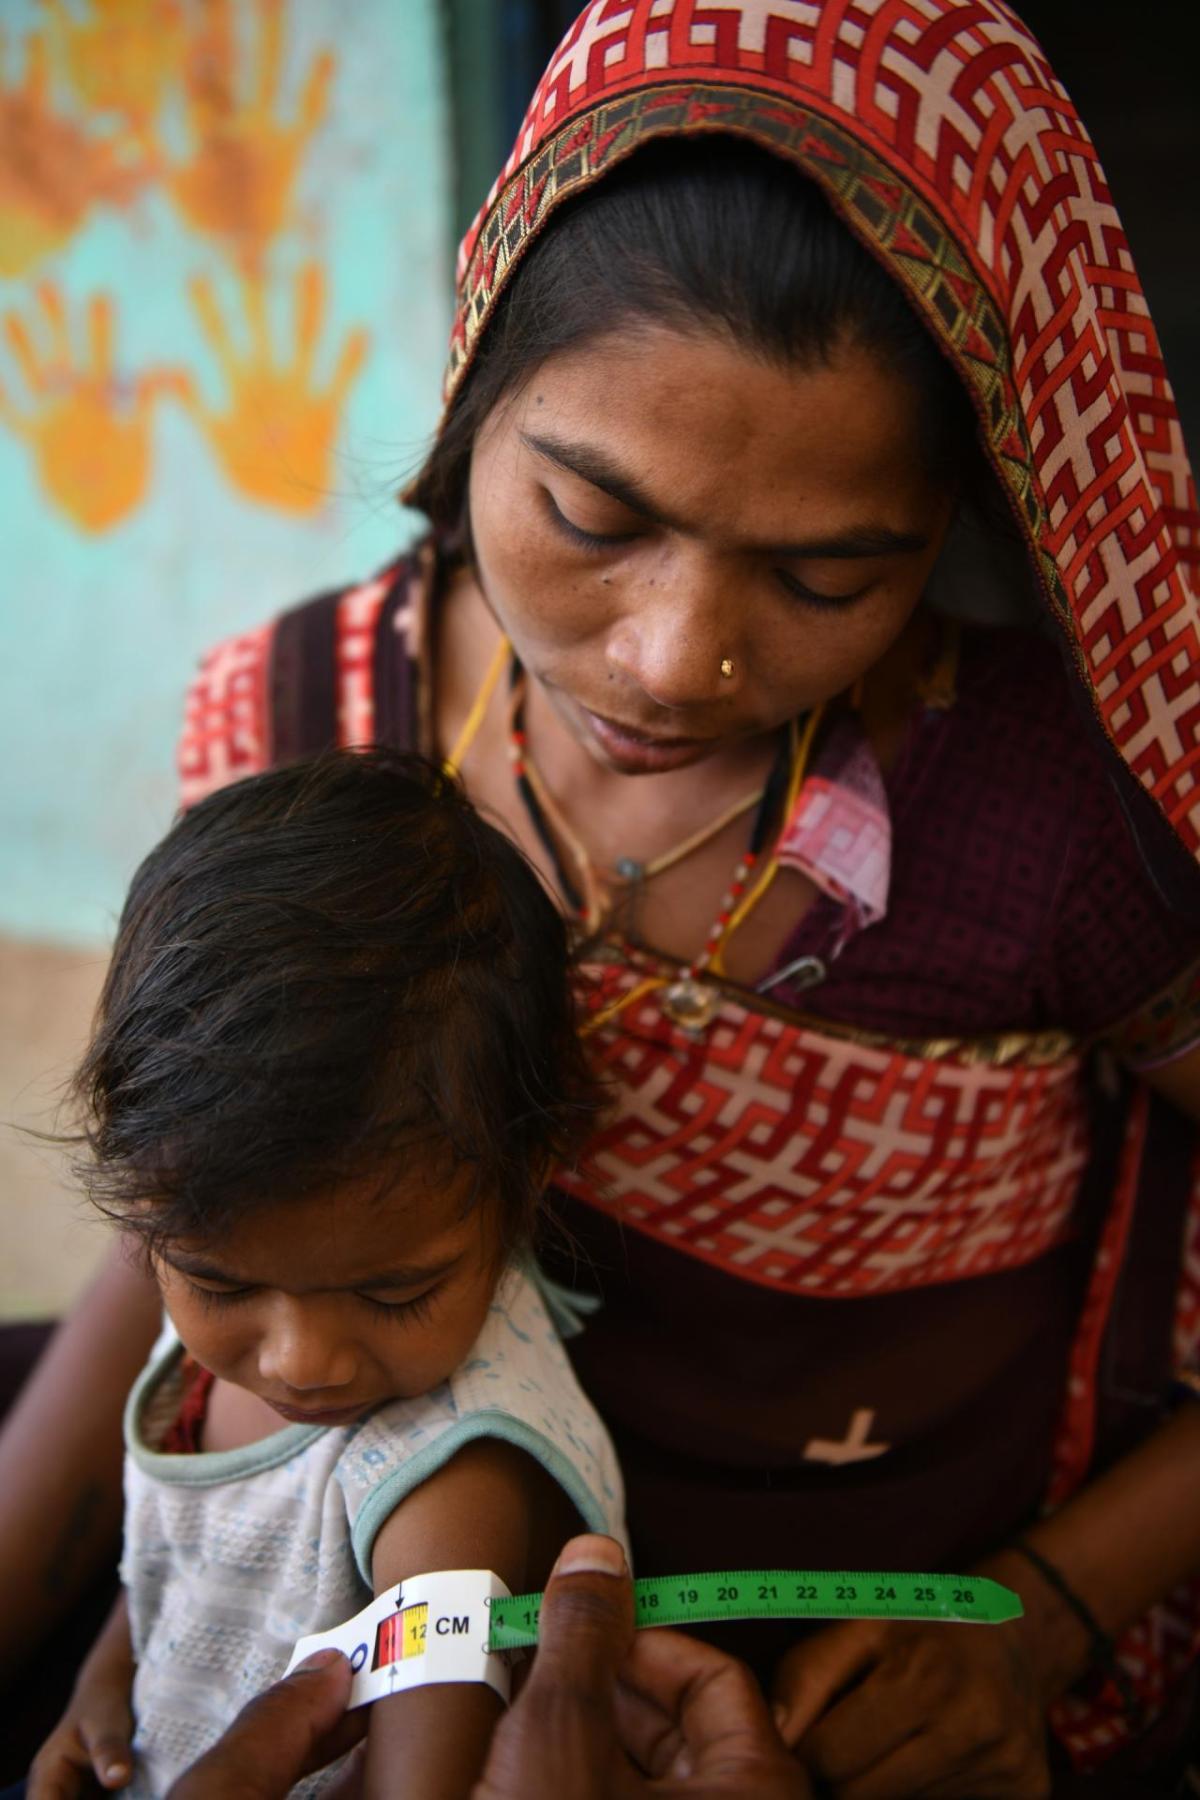 Our teams reached 46,000 people through our nutrition and health programs in India last year.